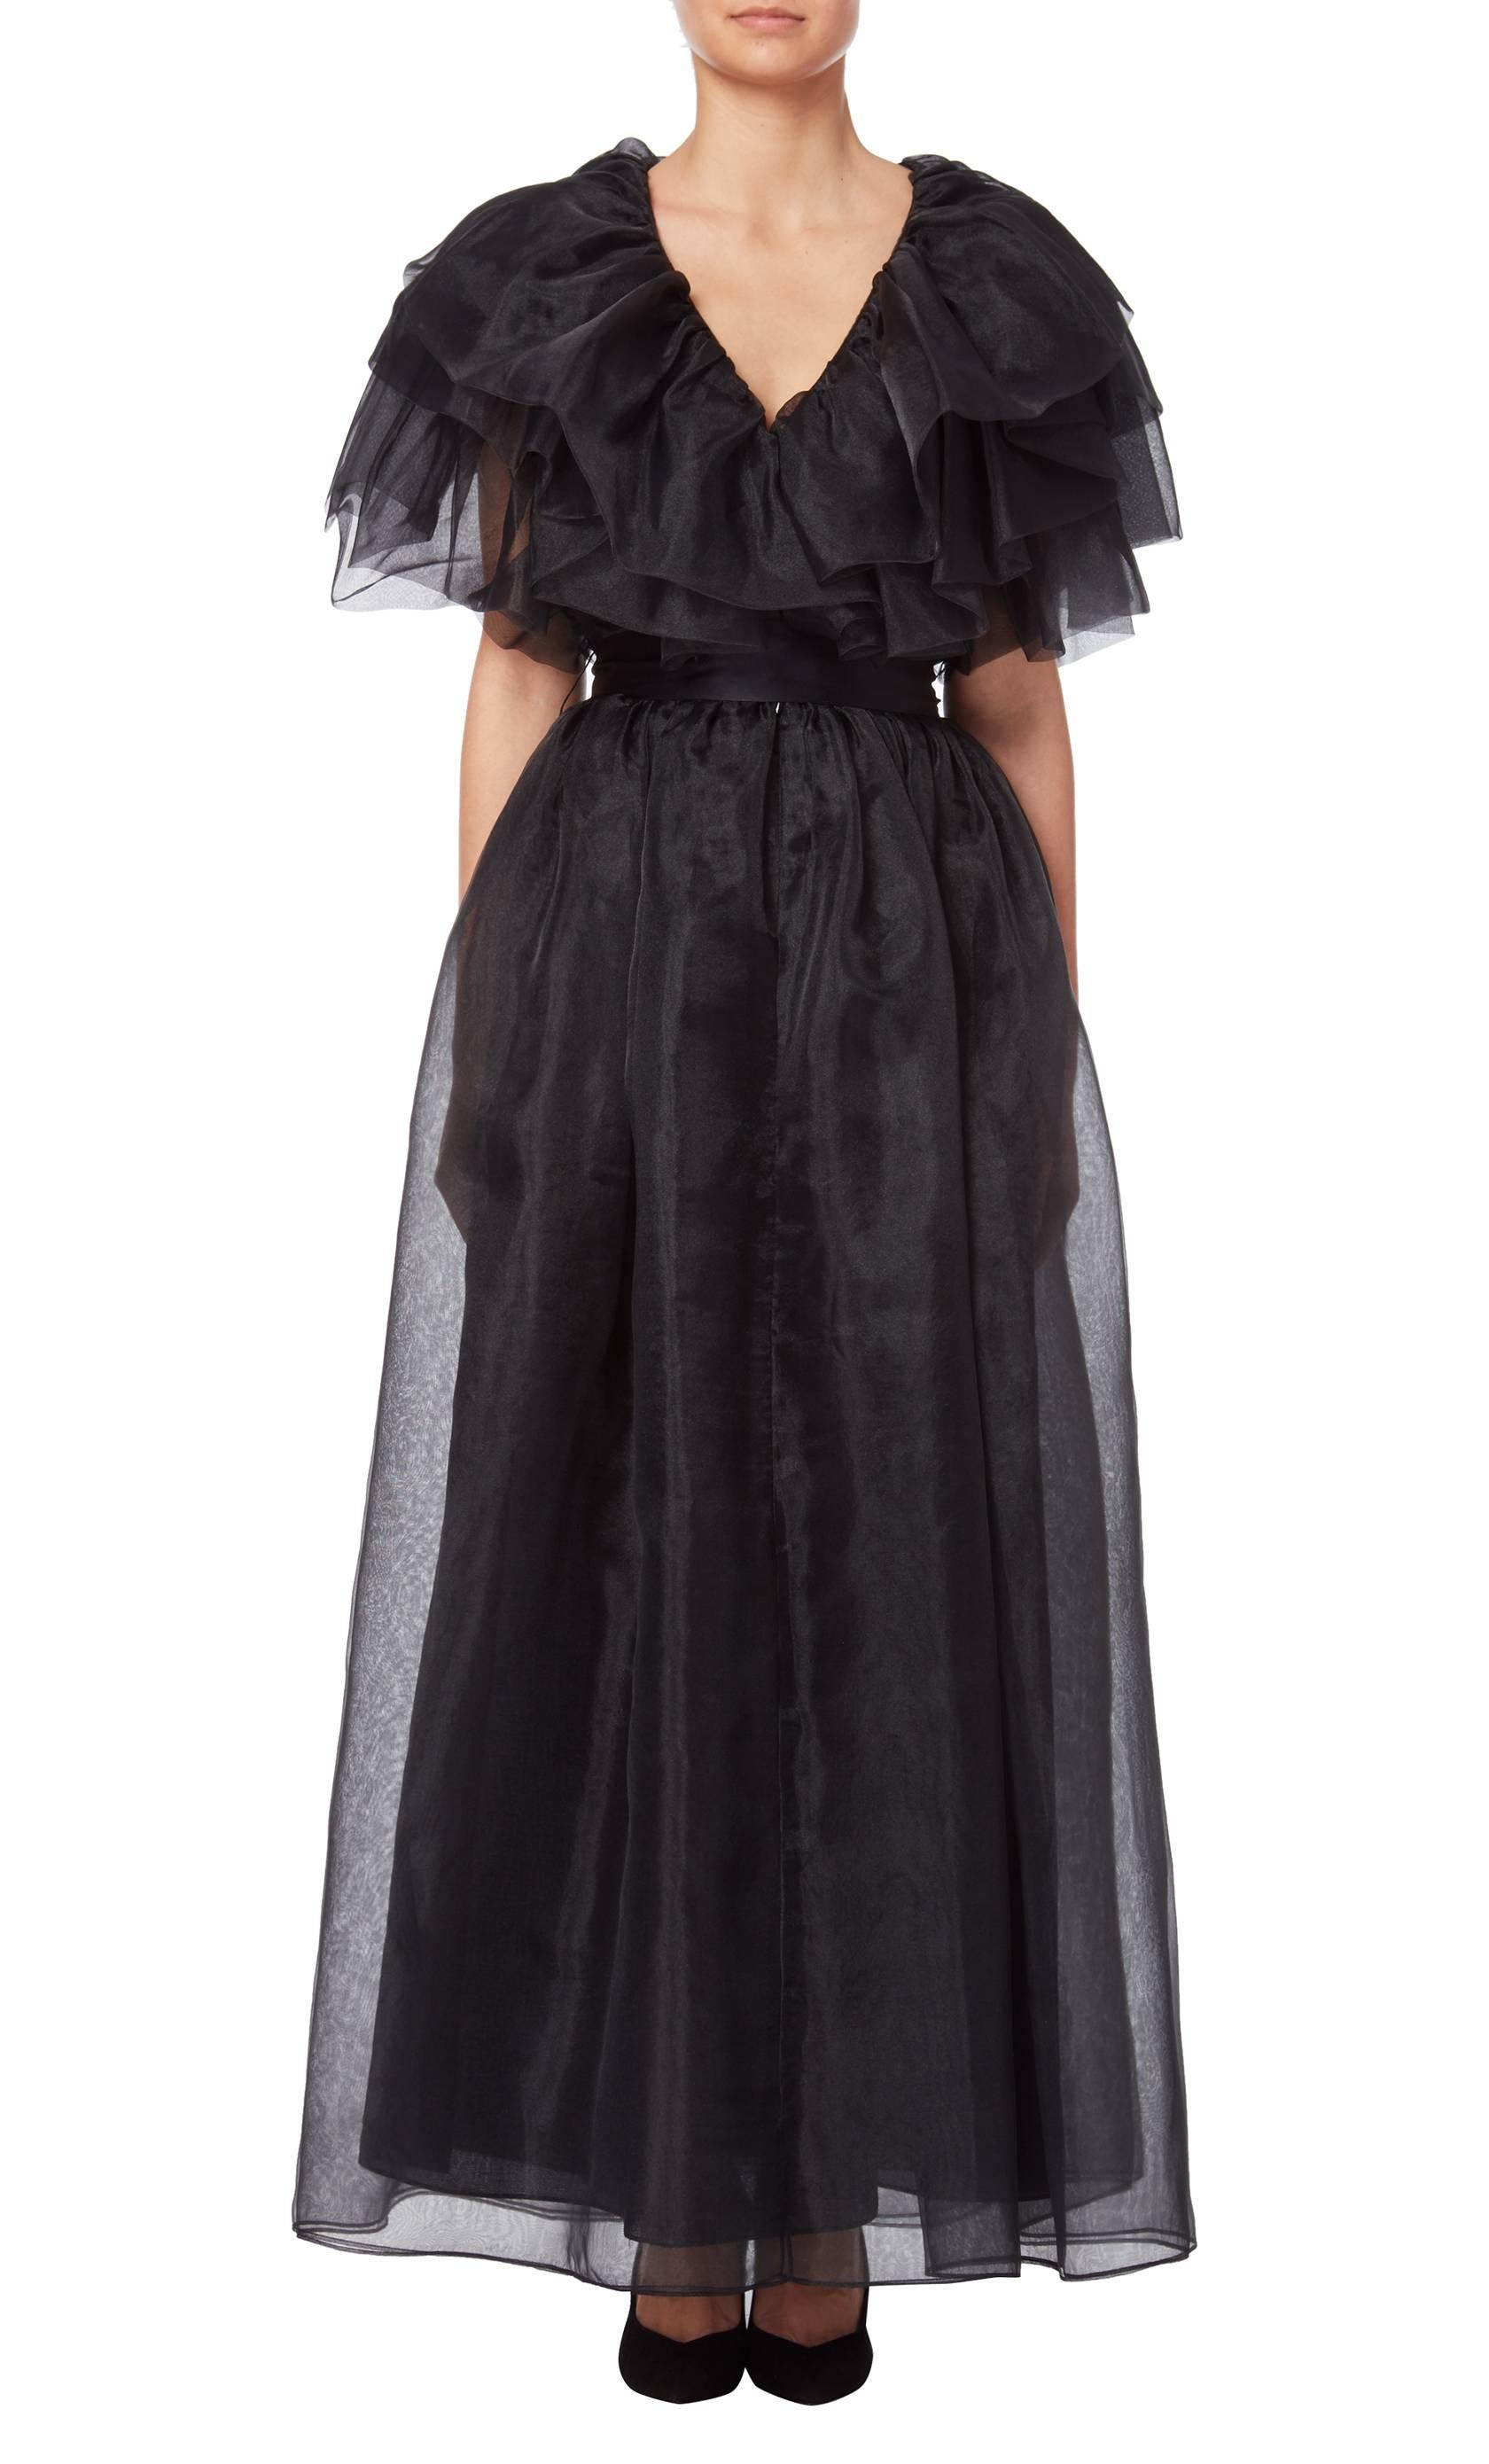 Black organza ruffle evening gown attributed to Halston, circa 1979. The gown has a matching sash and bears the venerable Giorgio of Beverly Hills Boutique label. A similar gown in an alternate colourway is part of the permanent collection at The